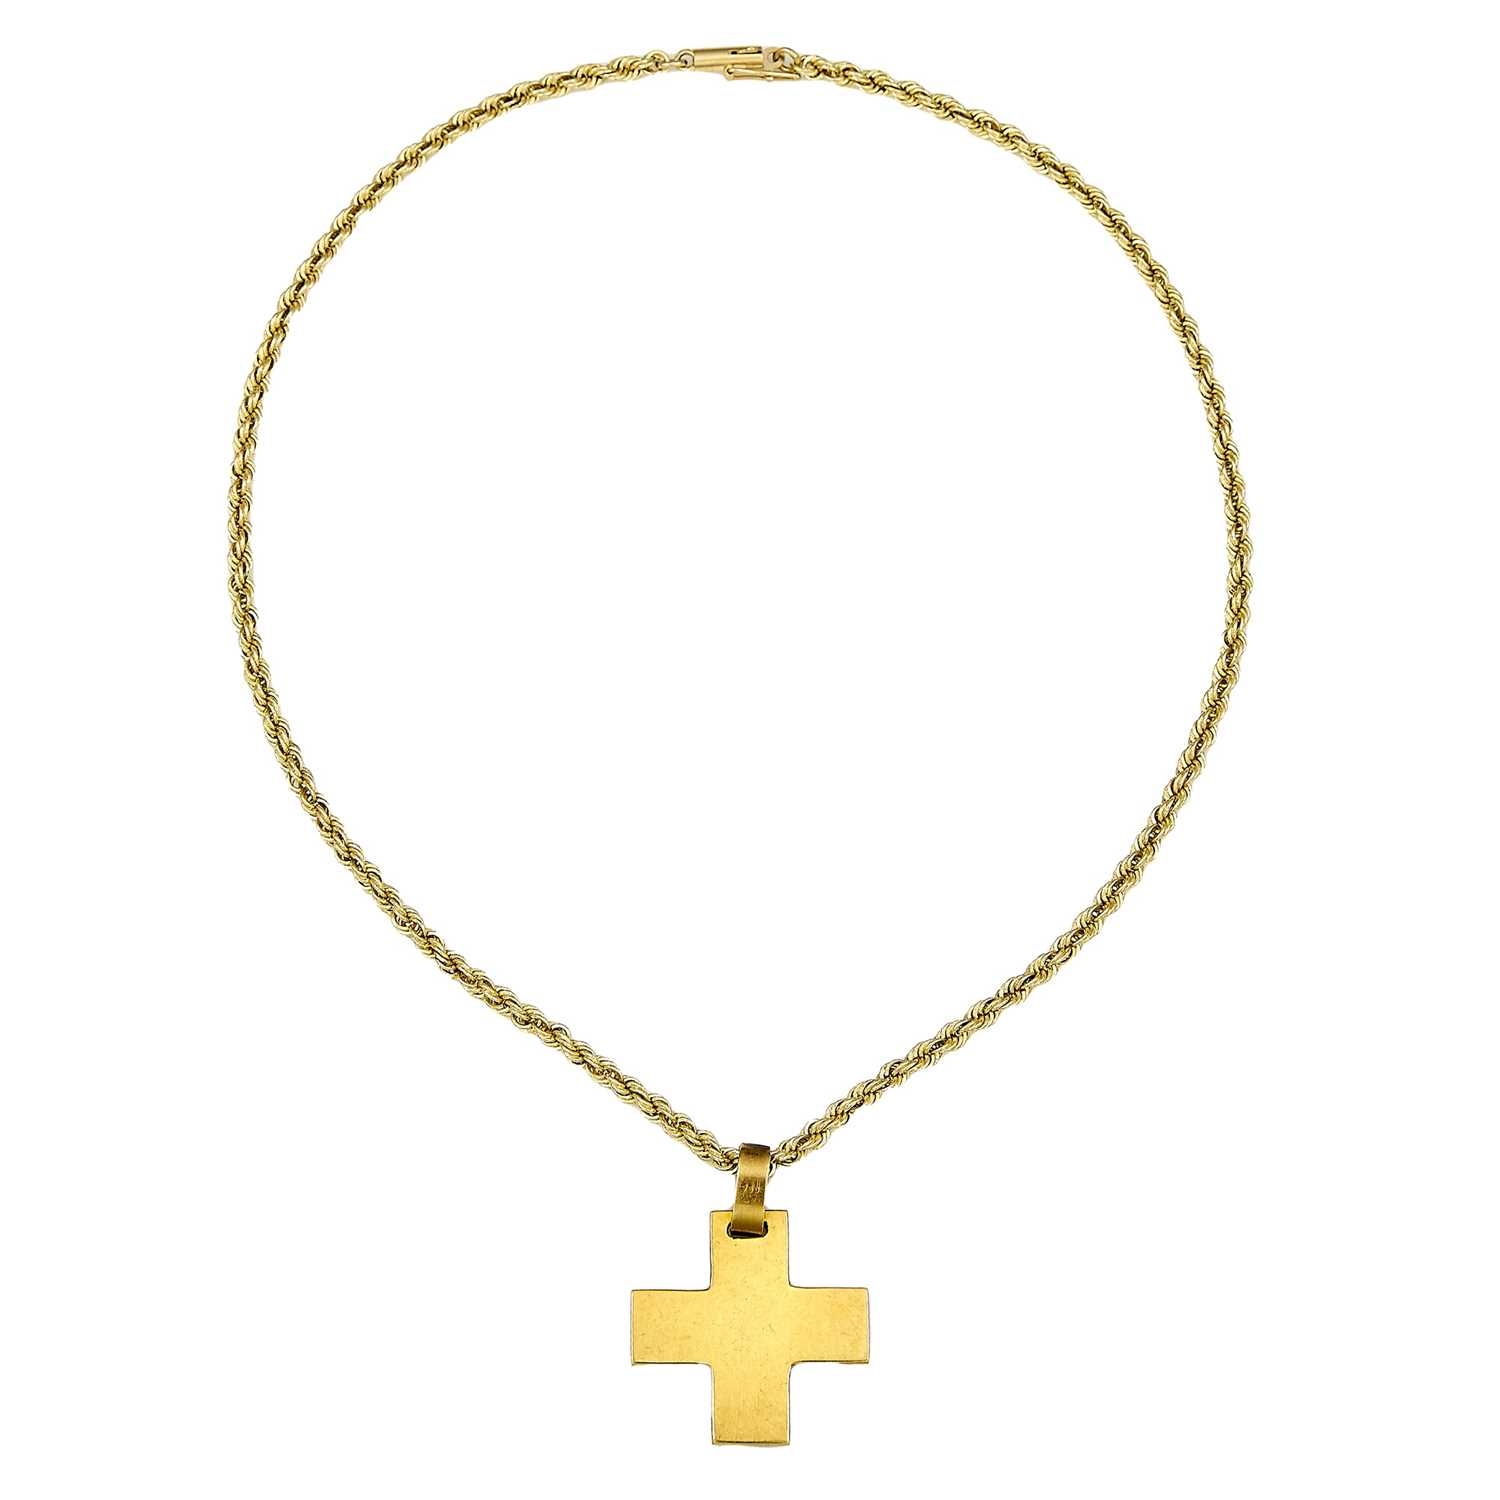 Lot 1027 - Gold and Stainless Steel Cross Pendant with Chain Necklace